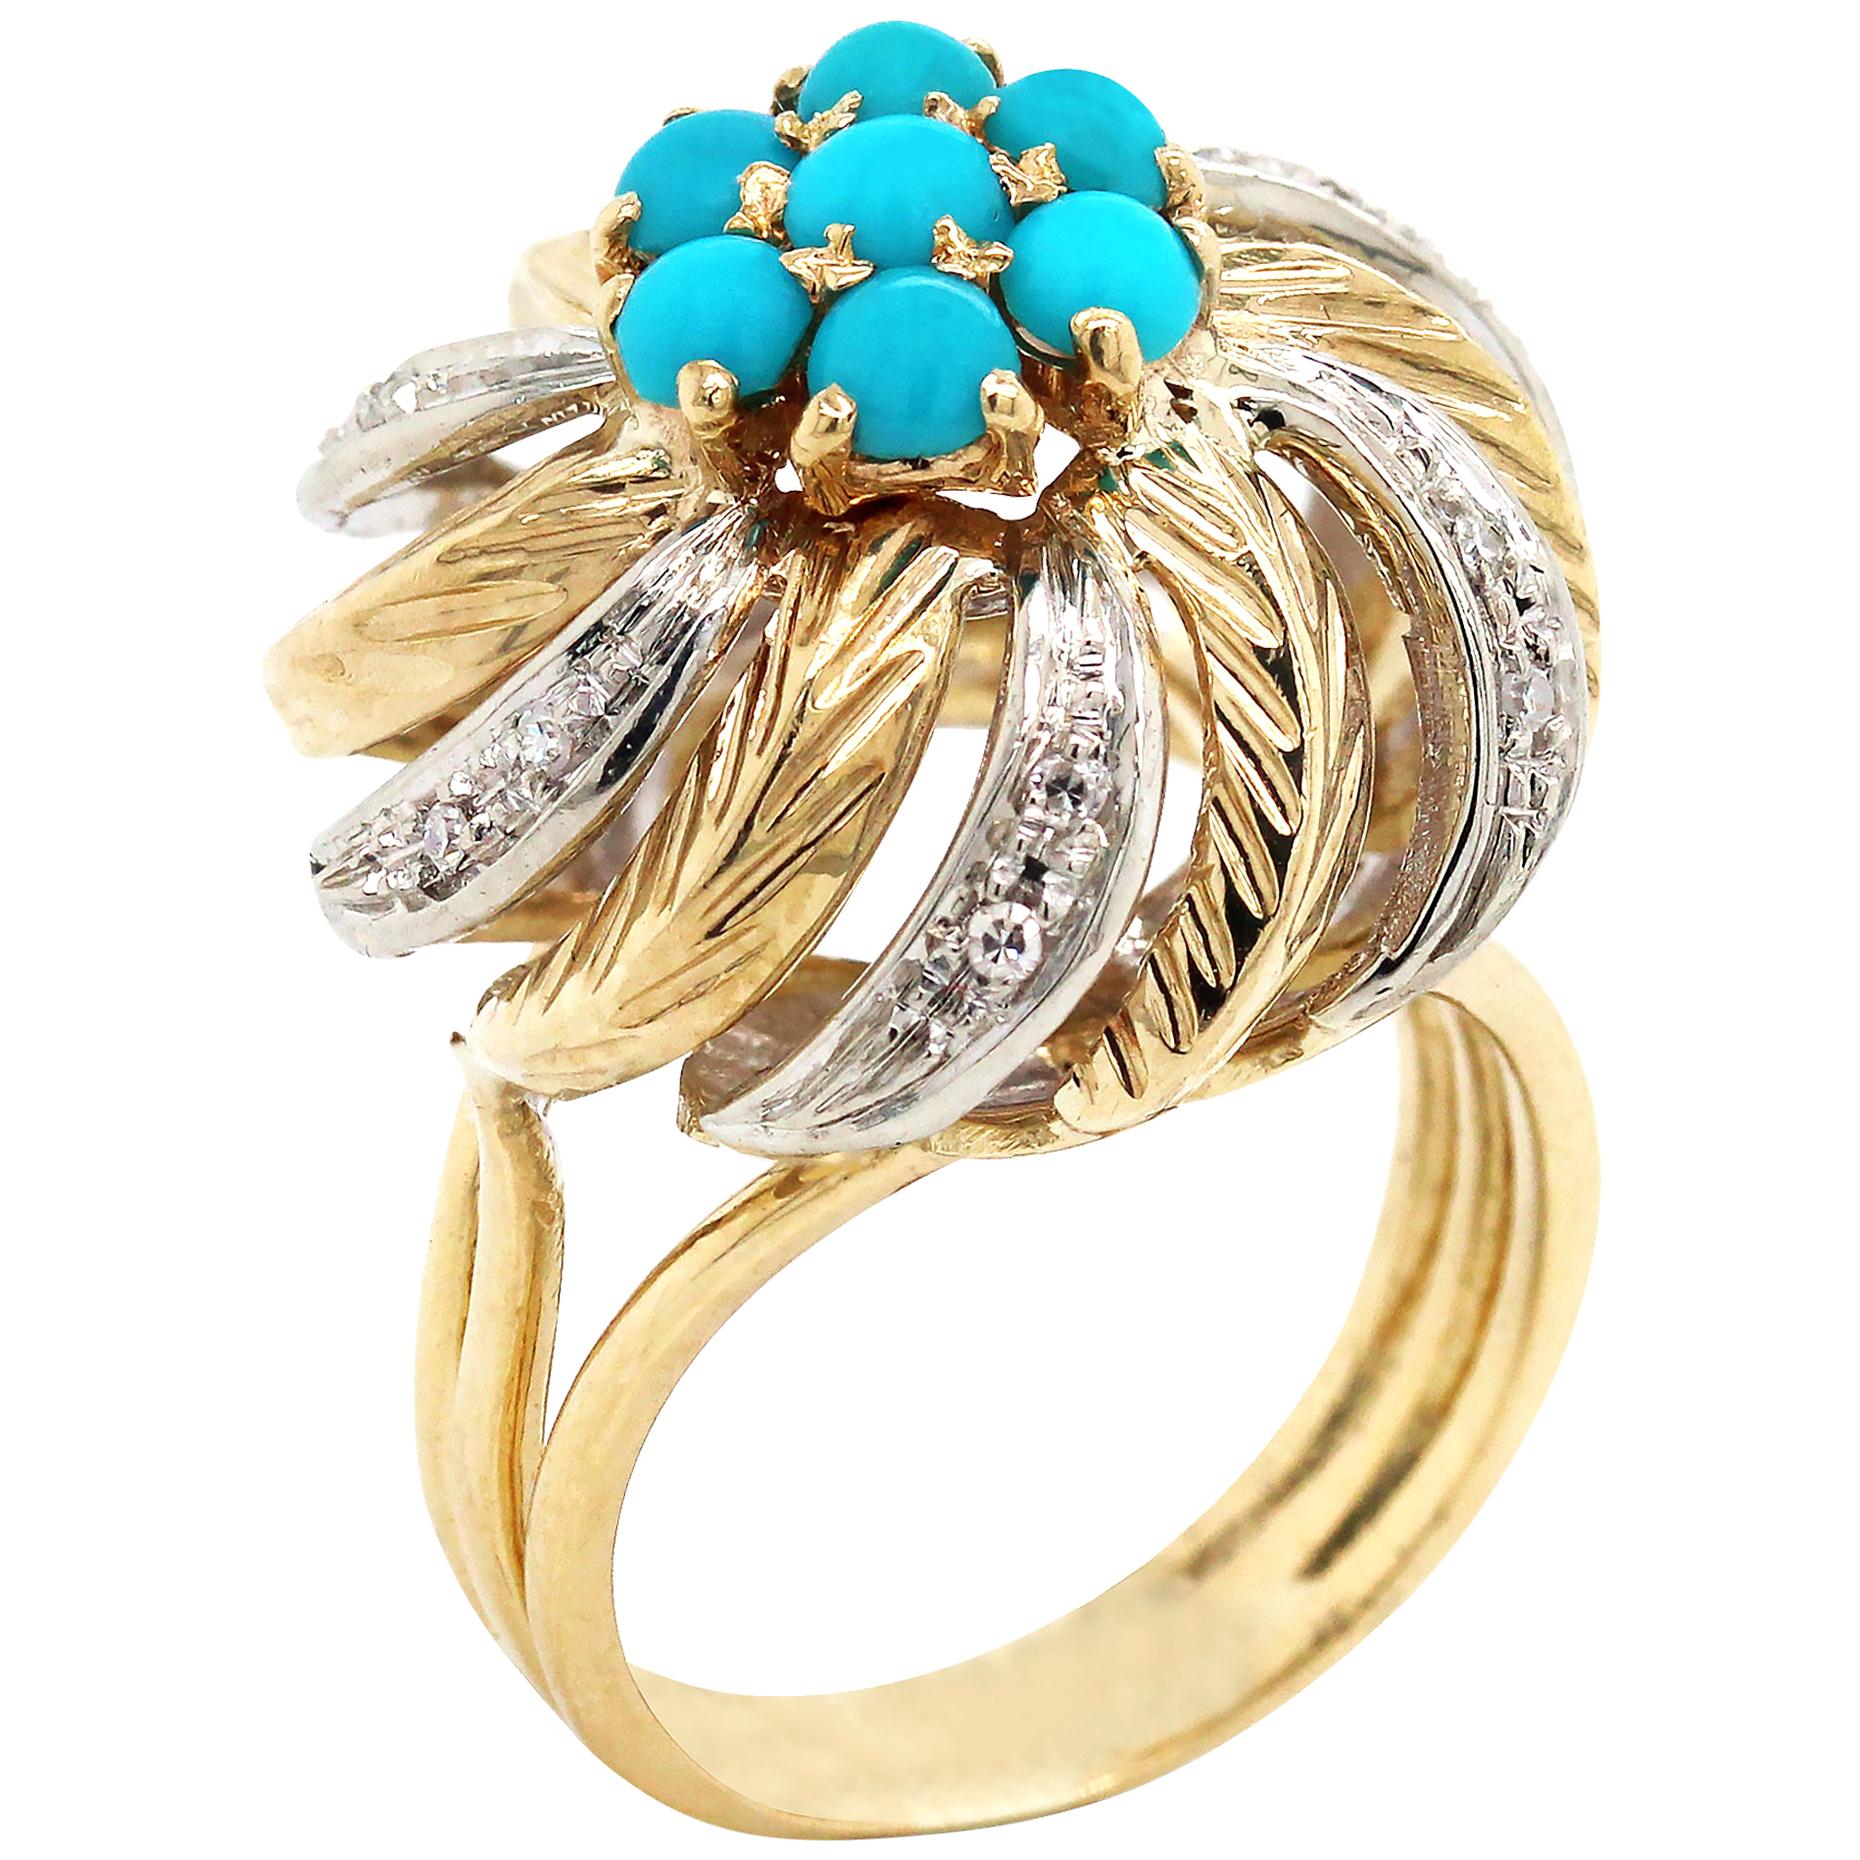 Yellow White Two-Tone Gold and Diamond Cocktail Ring with Turquoise